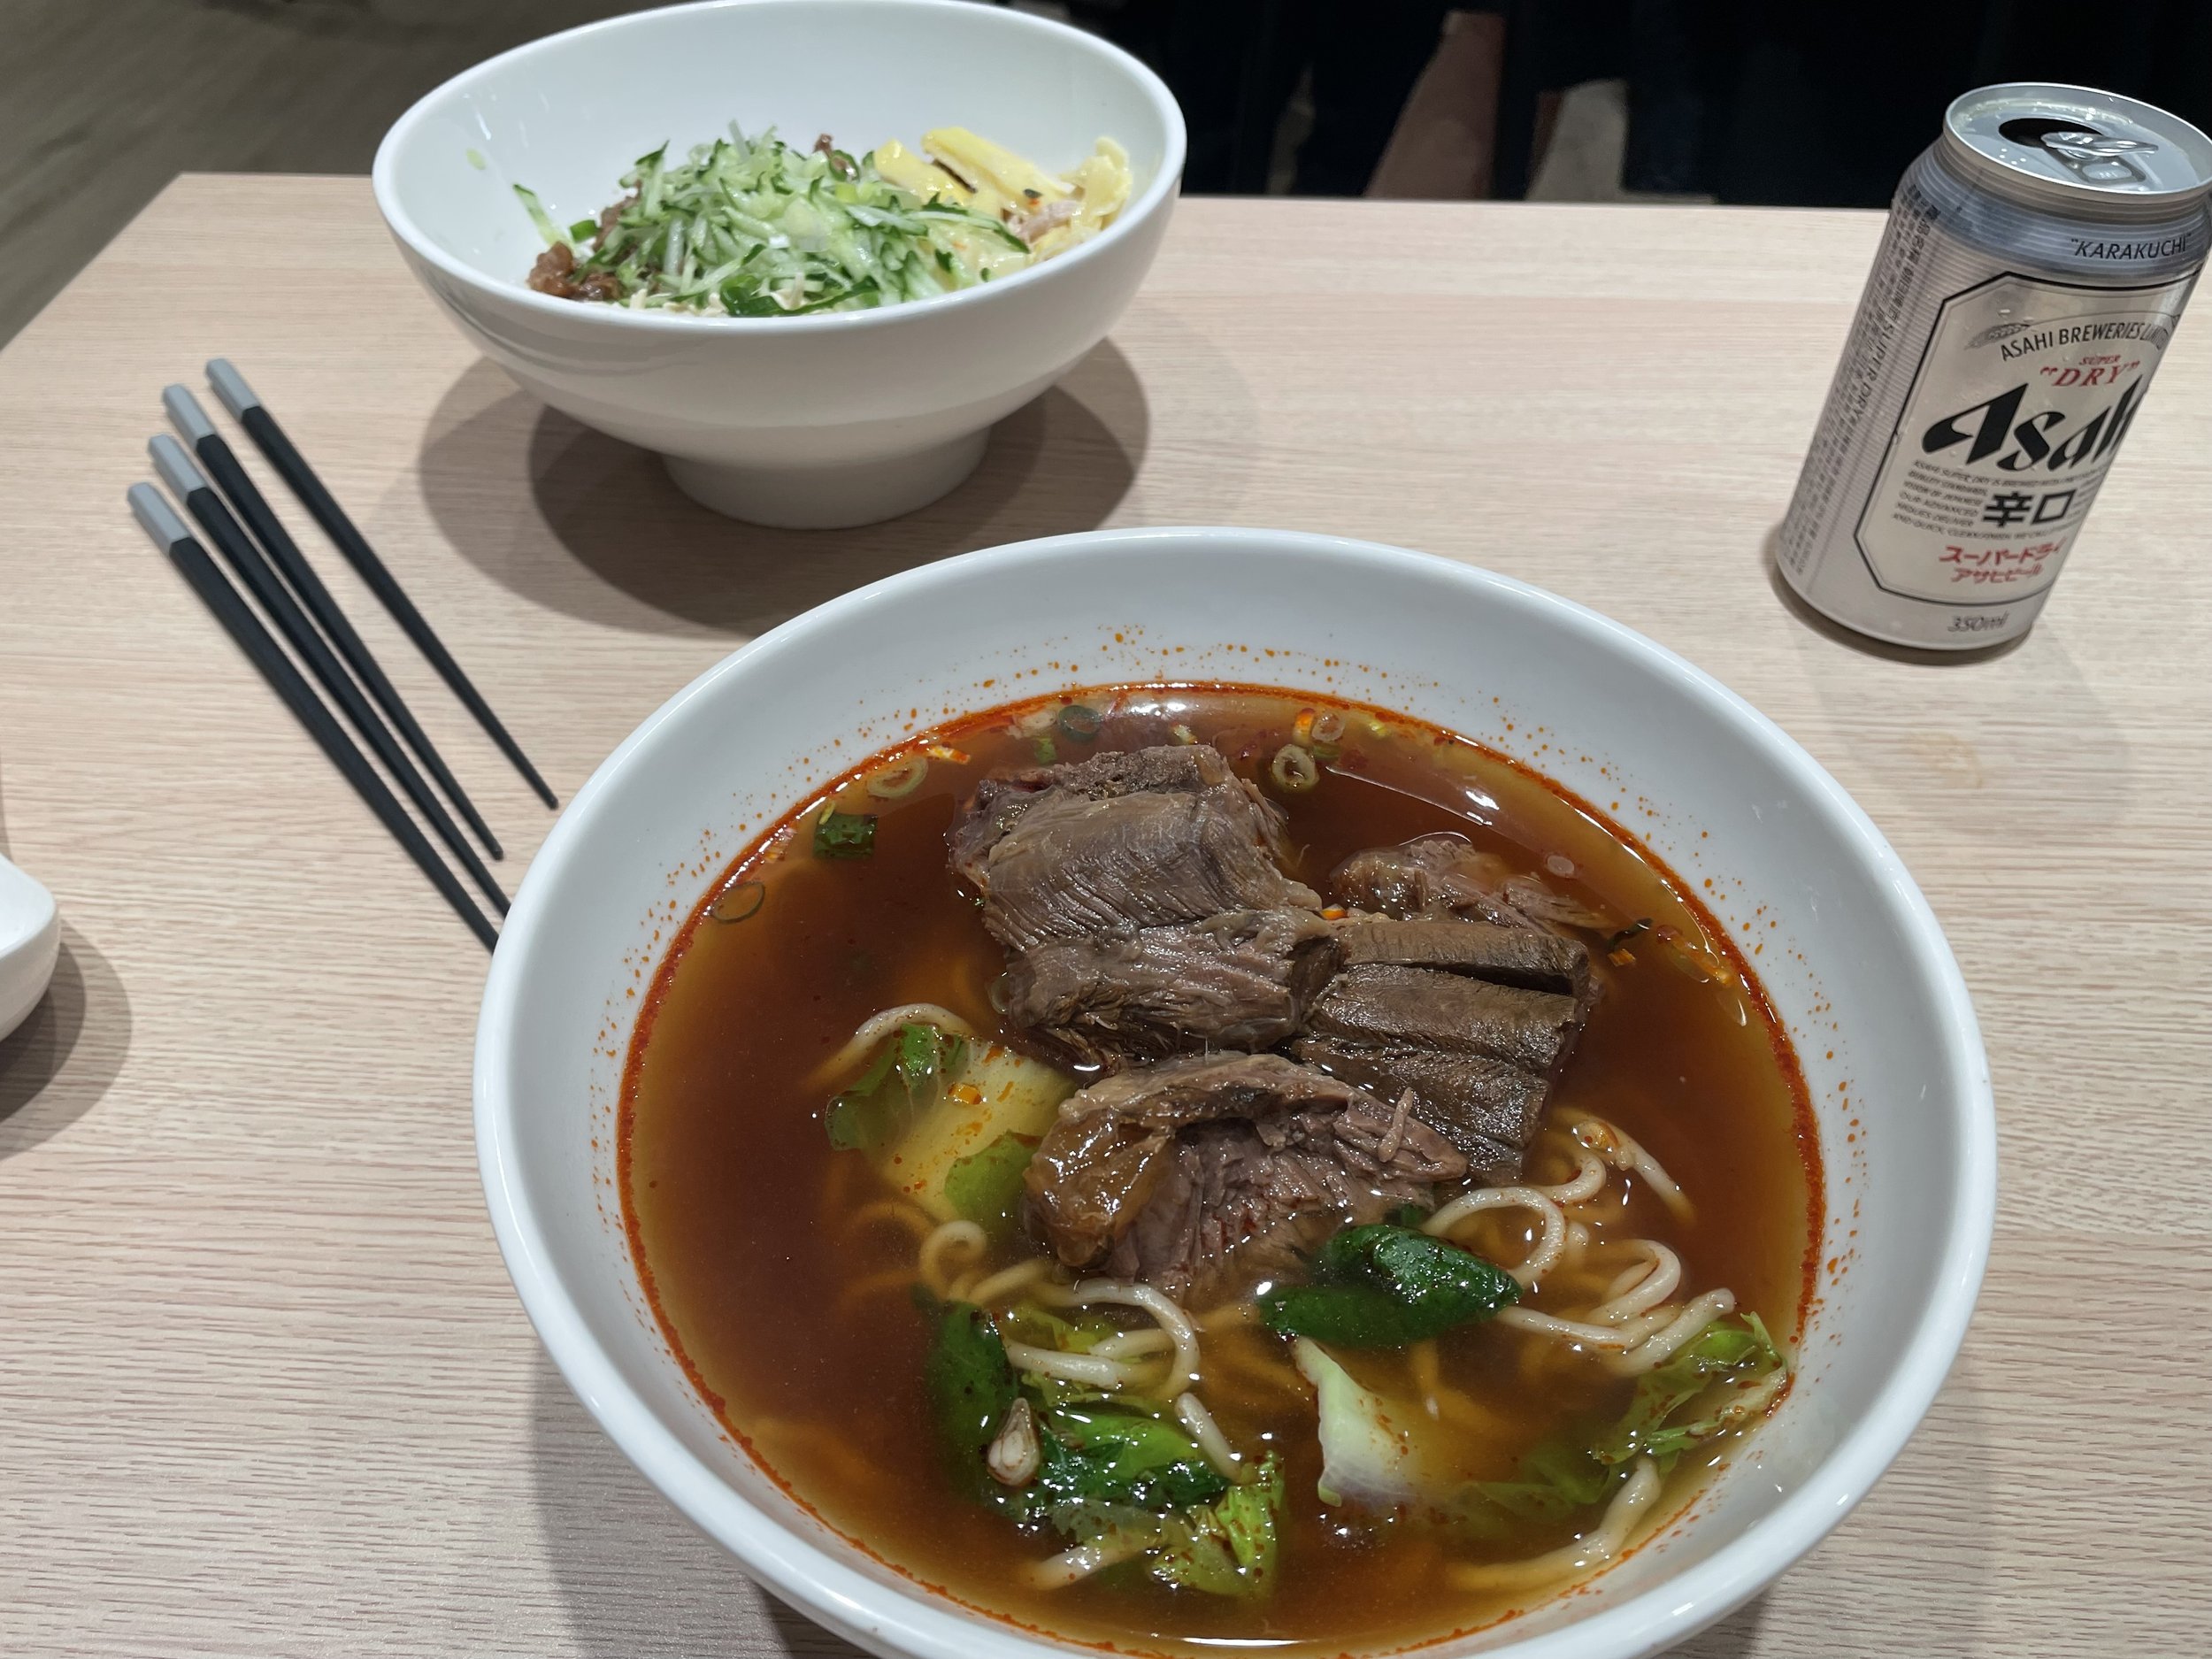 $7 beef noodles and $3 beer, Formosa Blvd Station, Kaohsiung